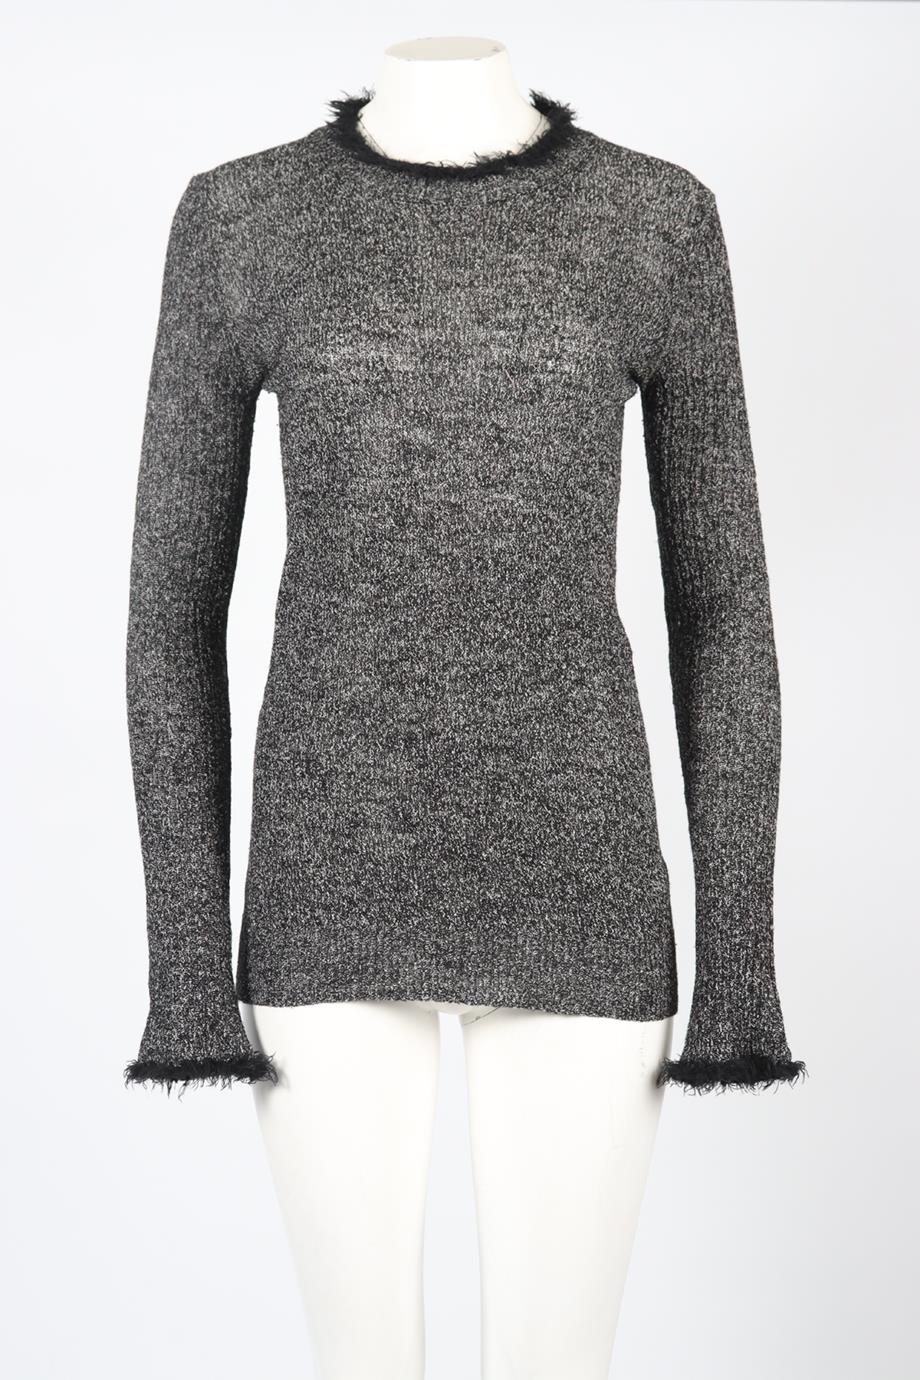 CELINE WOOL AND COTTON BLEND TOP SMALL